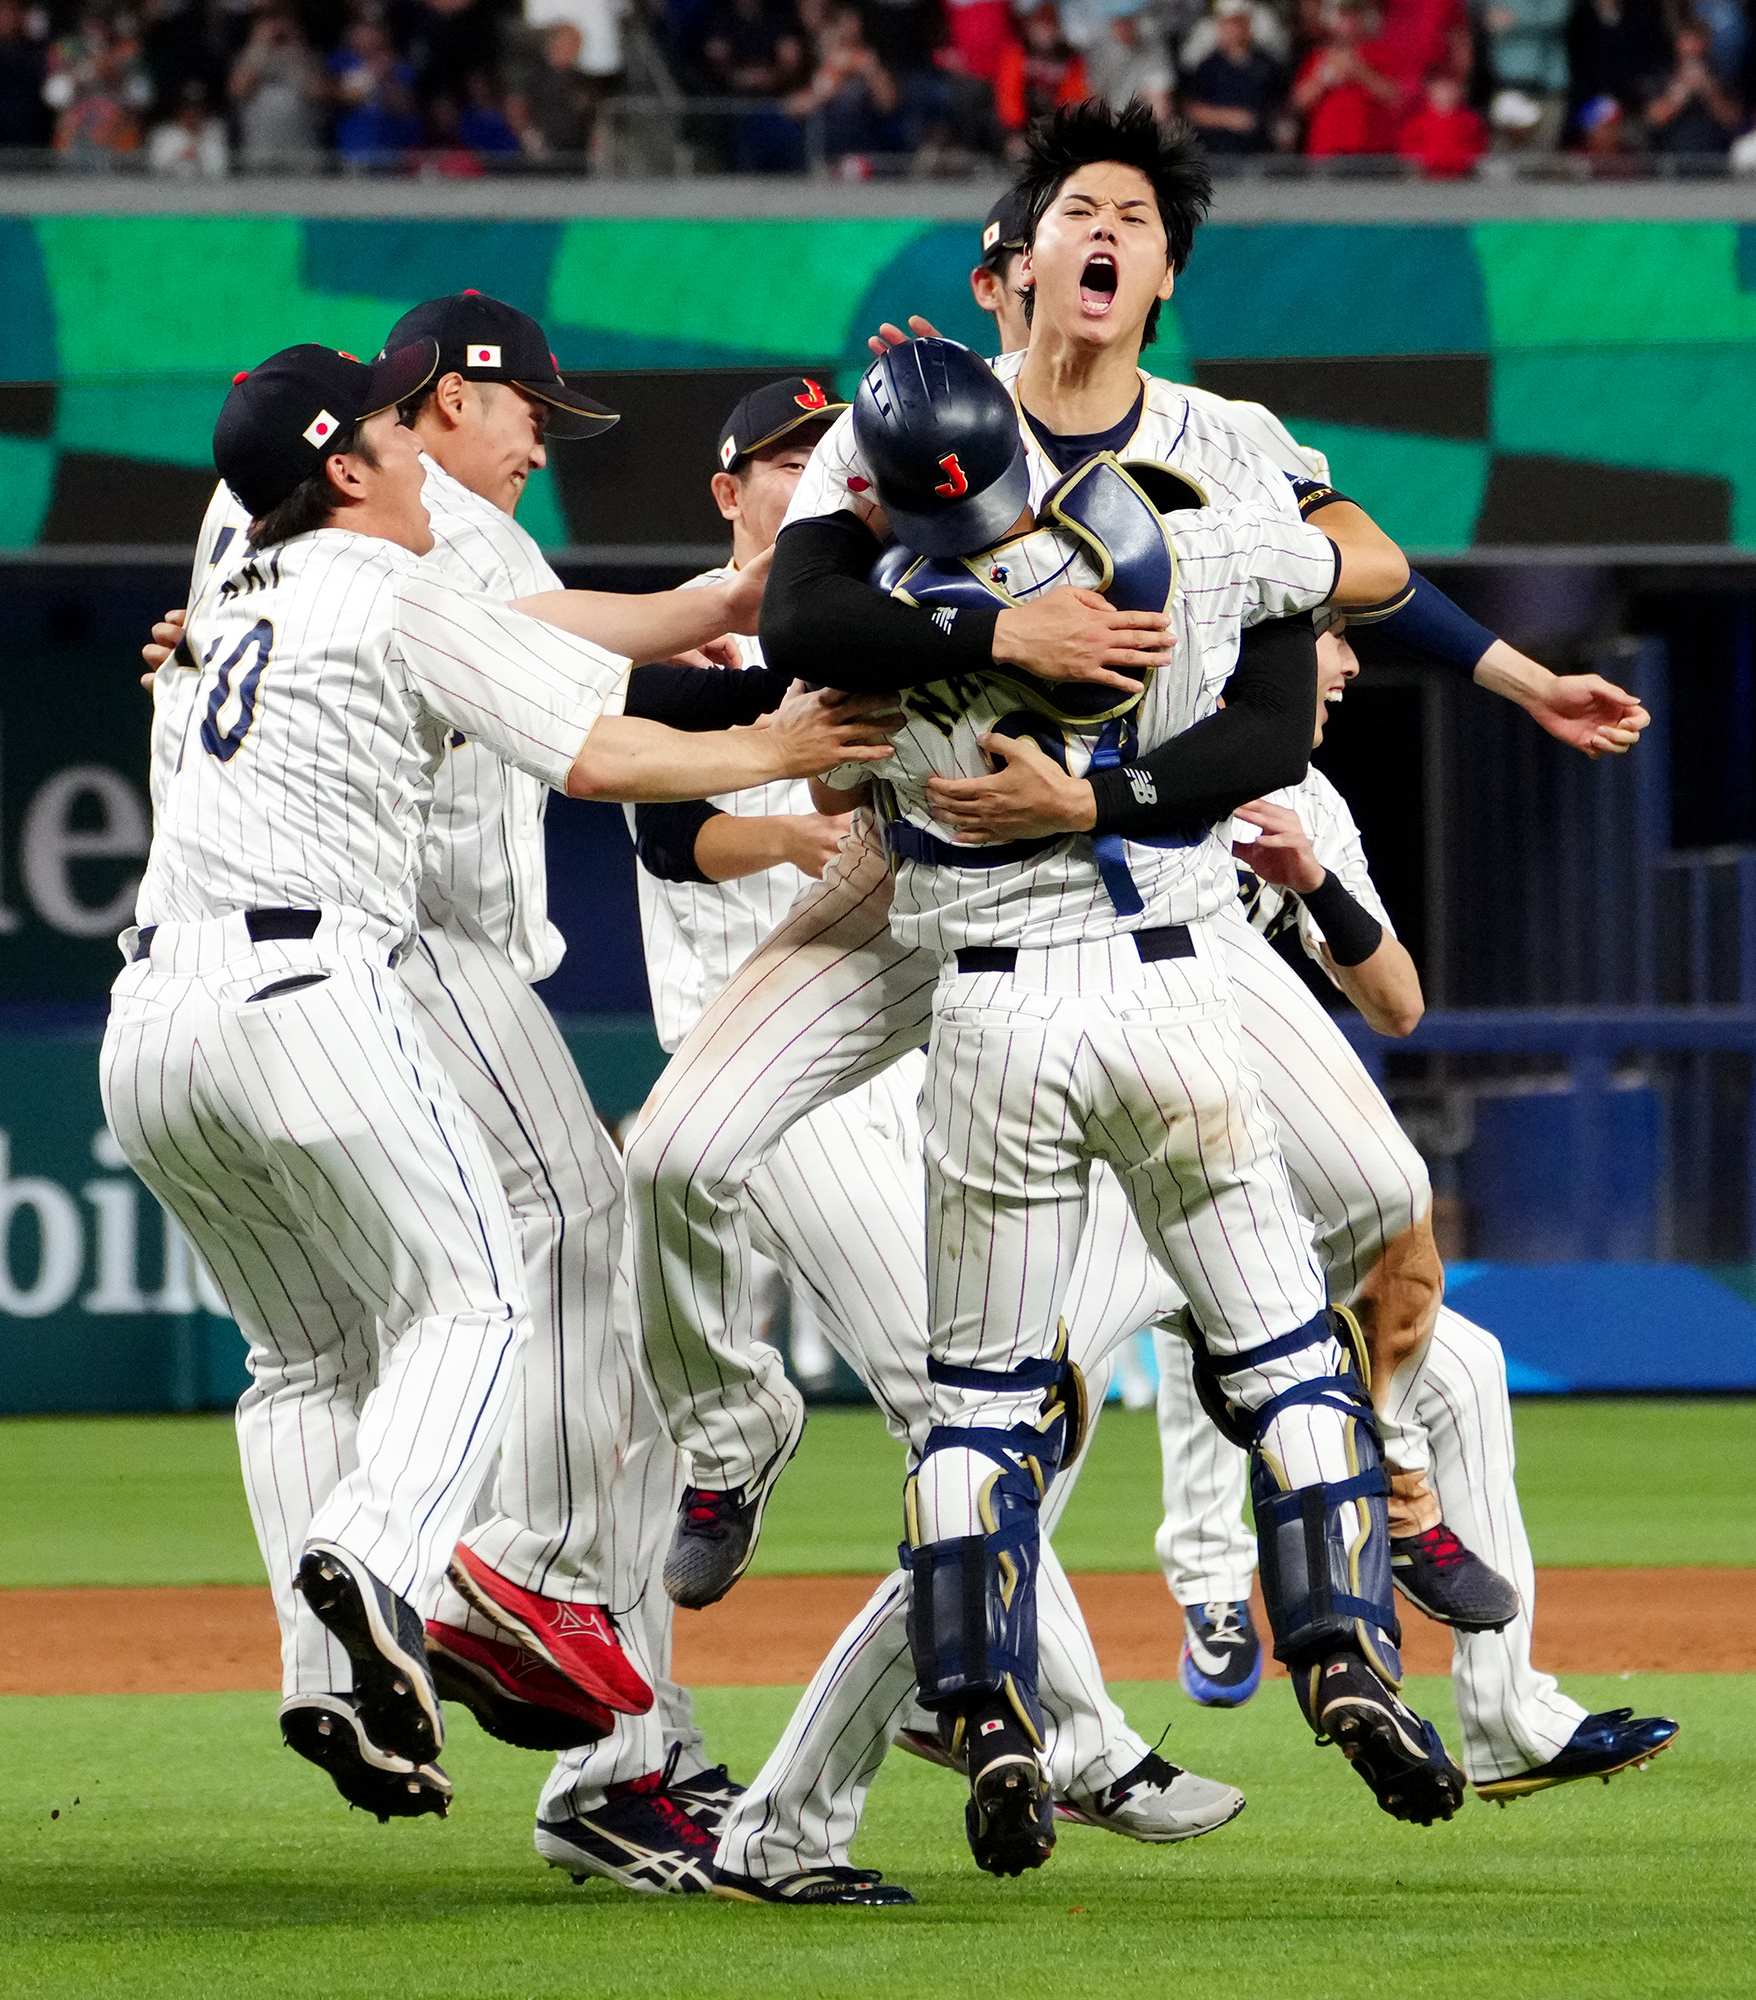 MIAMI, FL - MARCH 21: Shohei Ohtani #16 of Team Japan celebrates with teammates on the field after Team Japan defeated Team USA in the 2023 World Baseball Classic Championship game at loanDepot Park on Tuesday, March 21, 2023 in Miami, Florida. (Photo by Rob Tringali/WBCI/MLB Photos via Getty Images) 